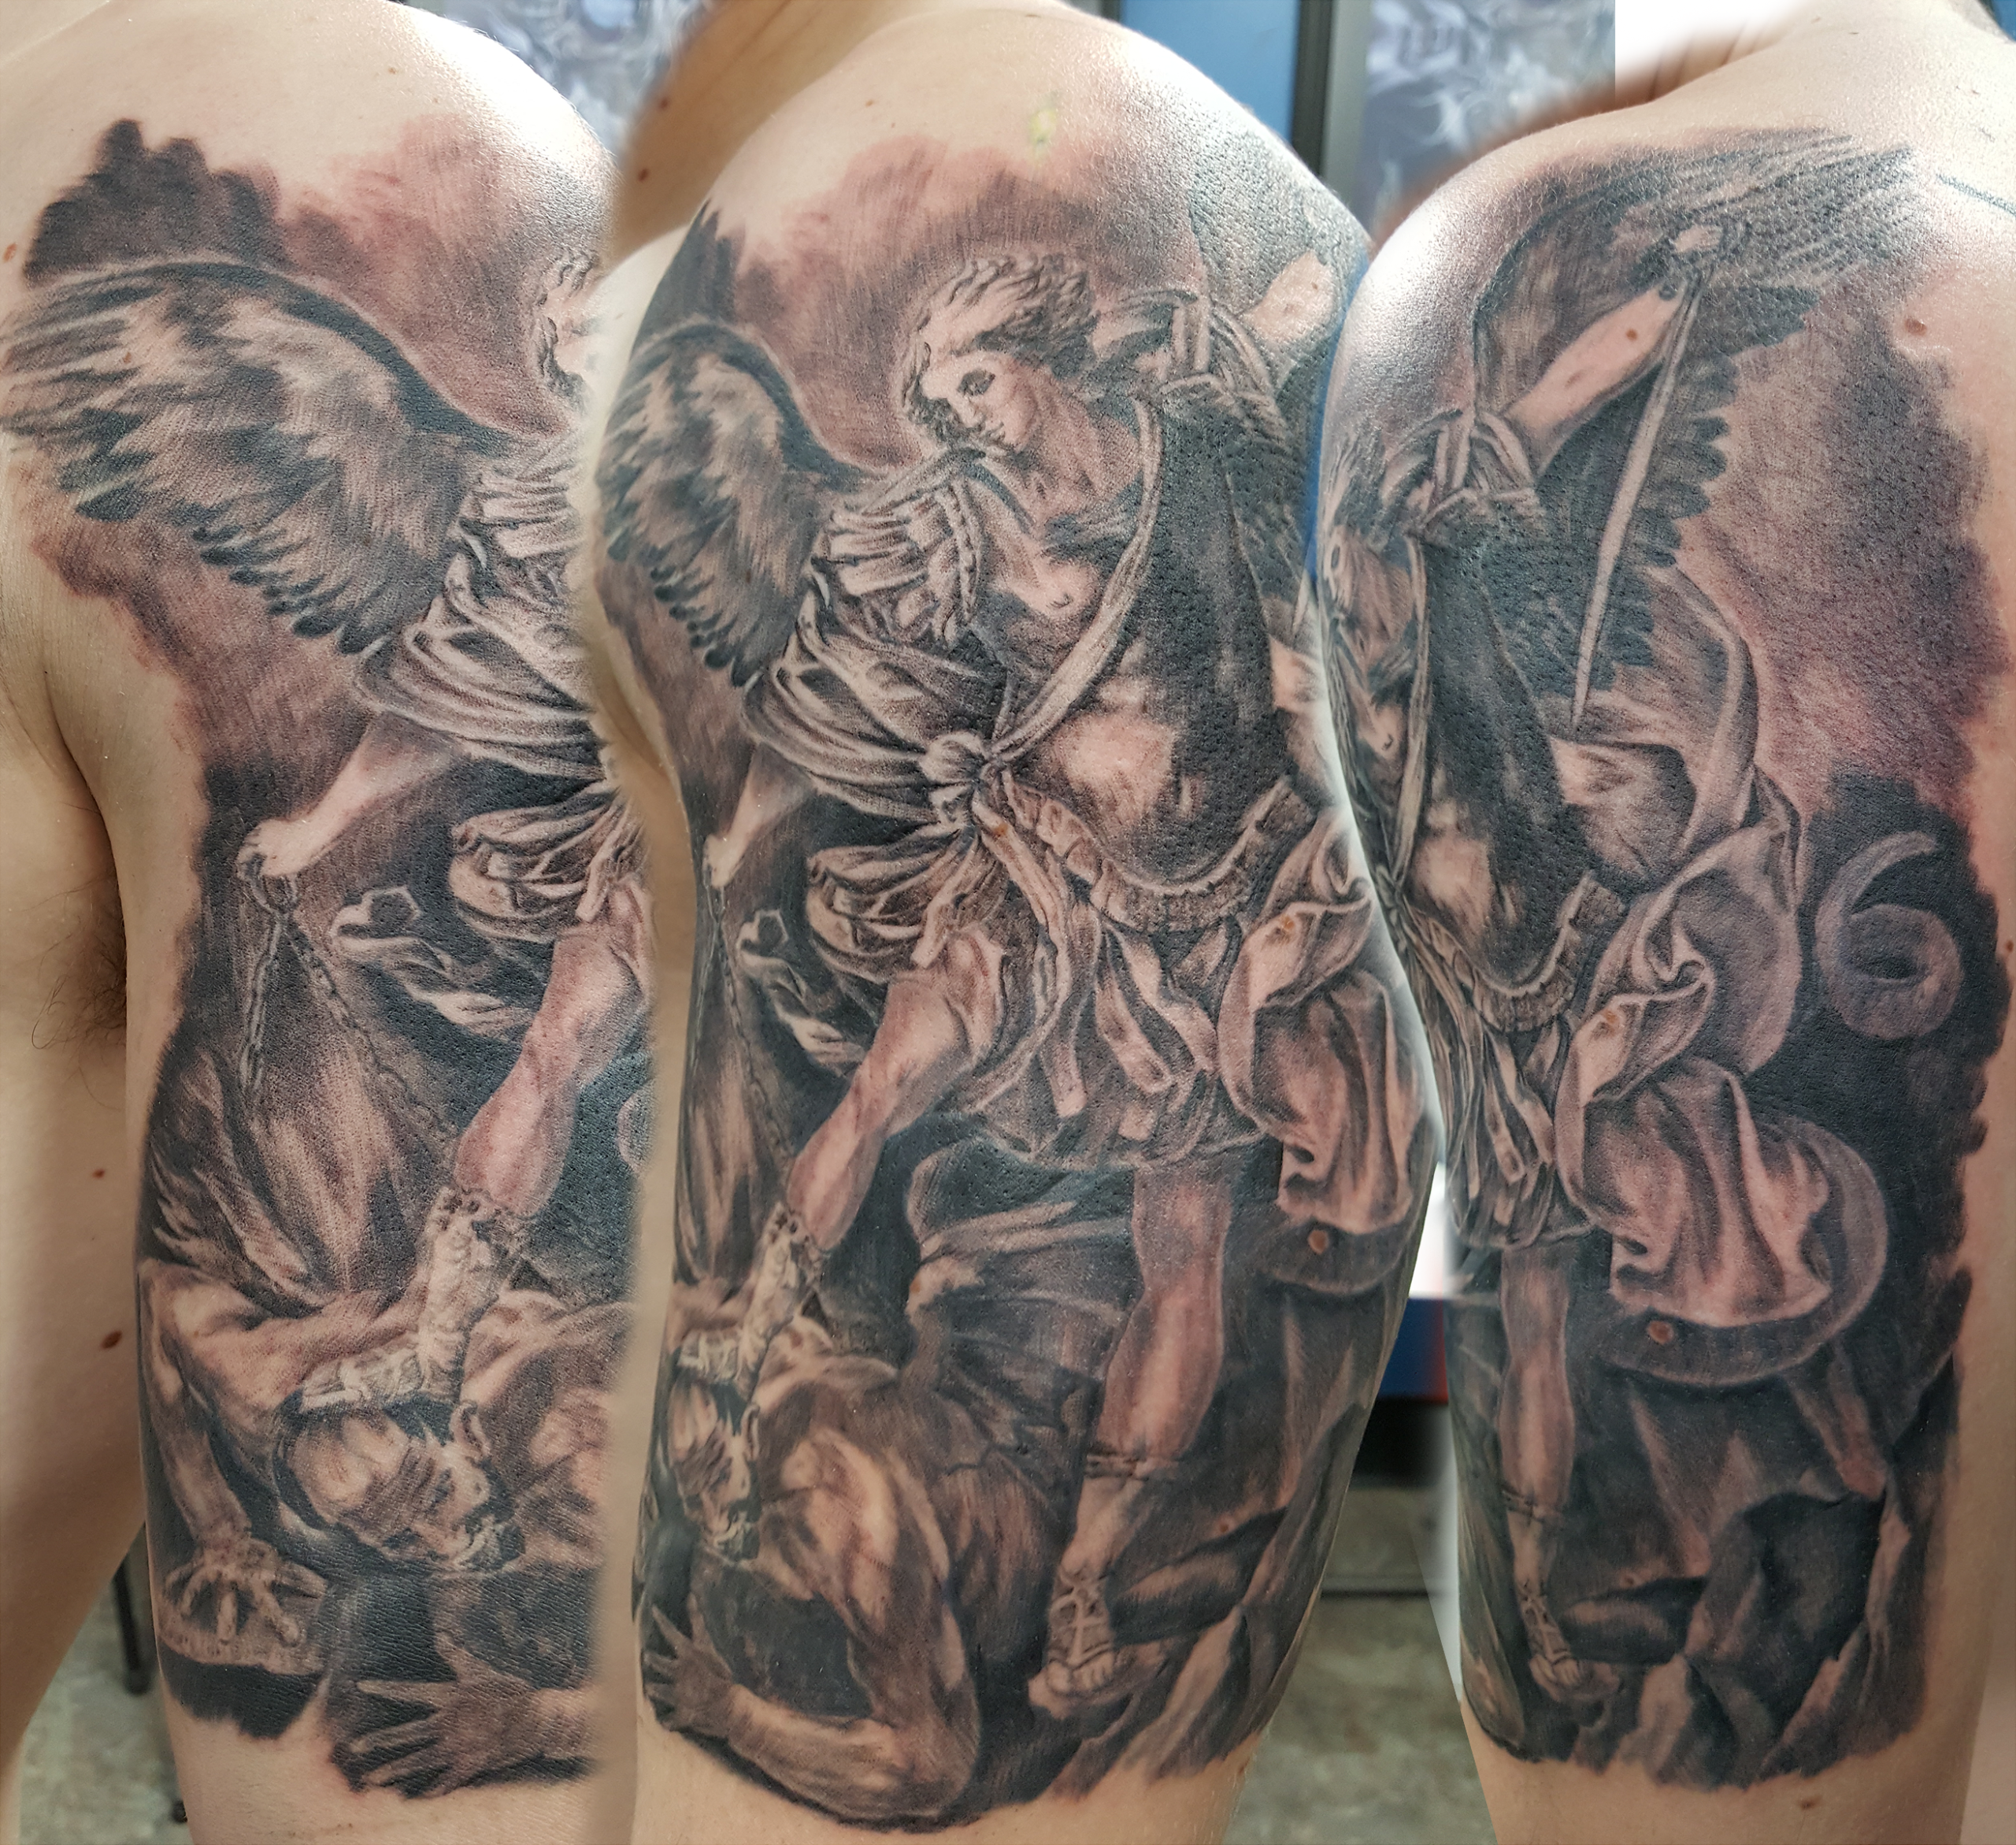 St Micahel tattoo adapted from Guido Reni painting. Realistic black and grey tattooing.